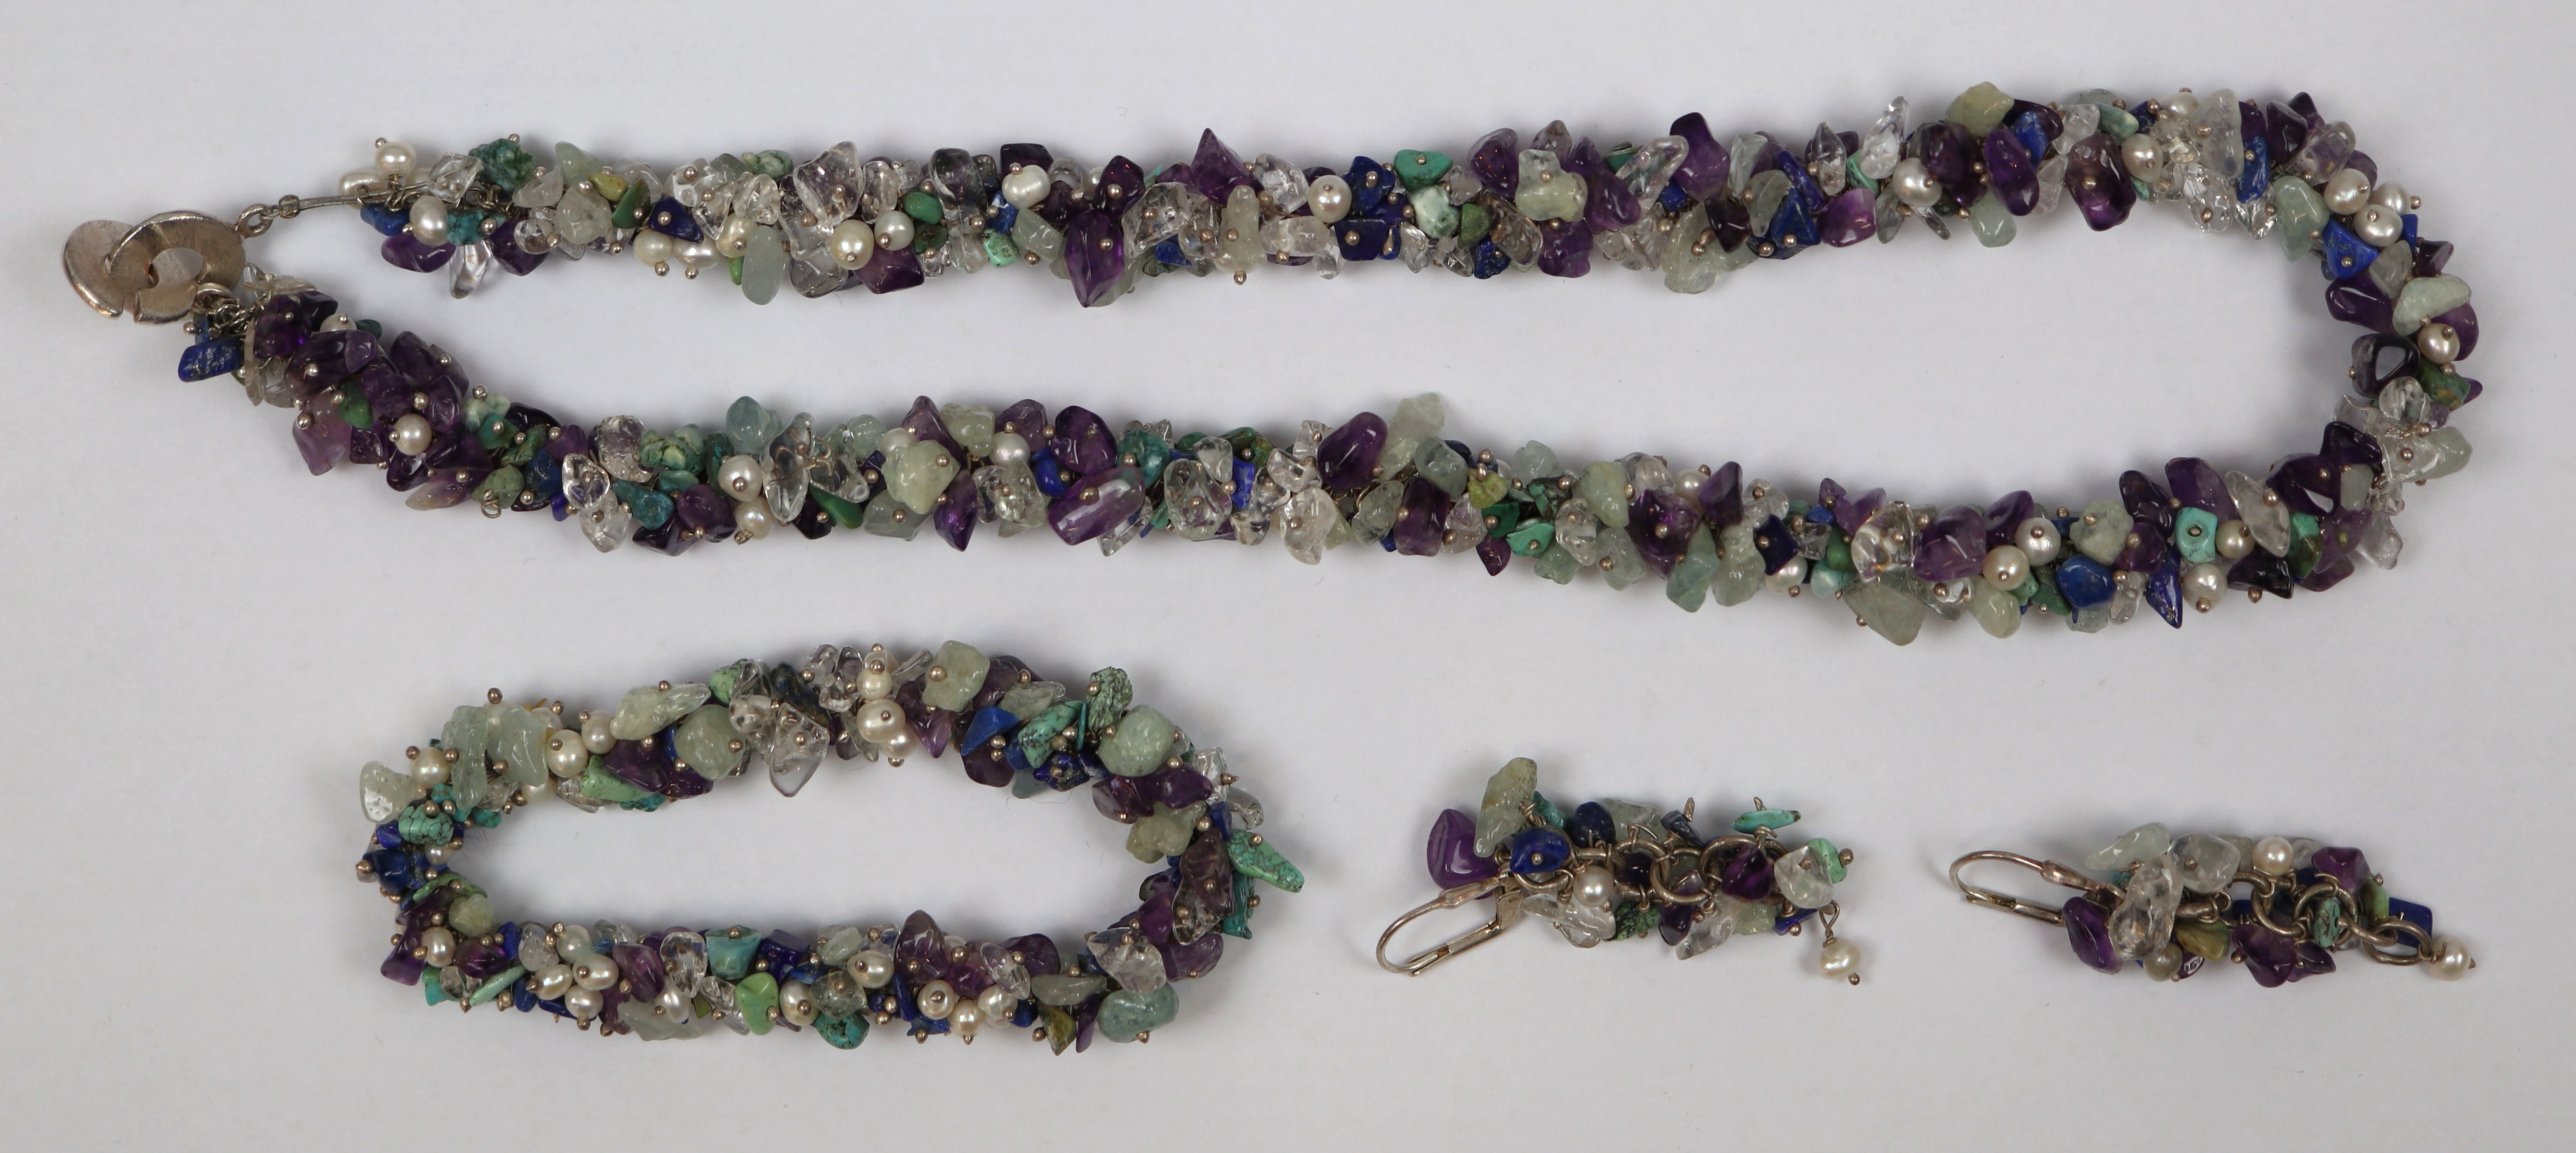 Necklace, bracelet and earring set - Amethyst, pearl etc - Image 3 of 3